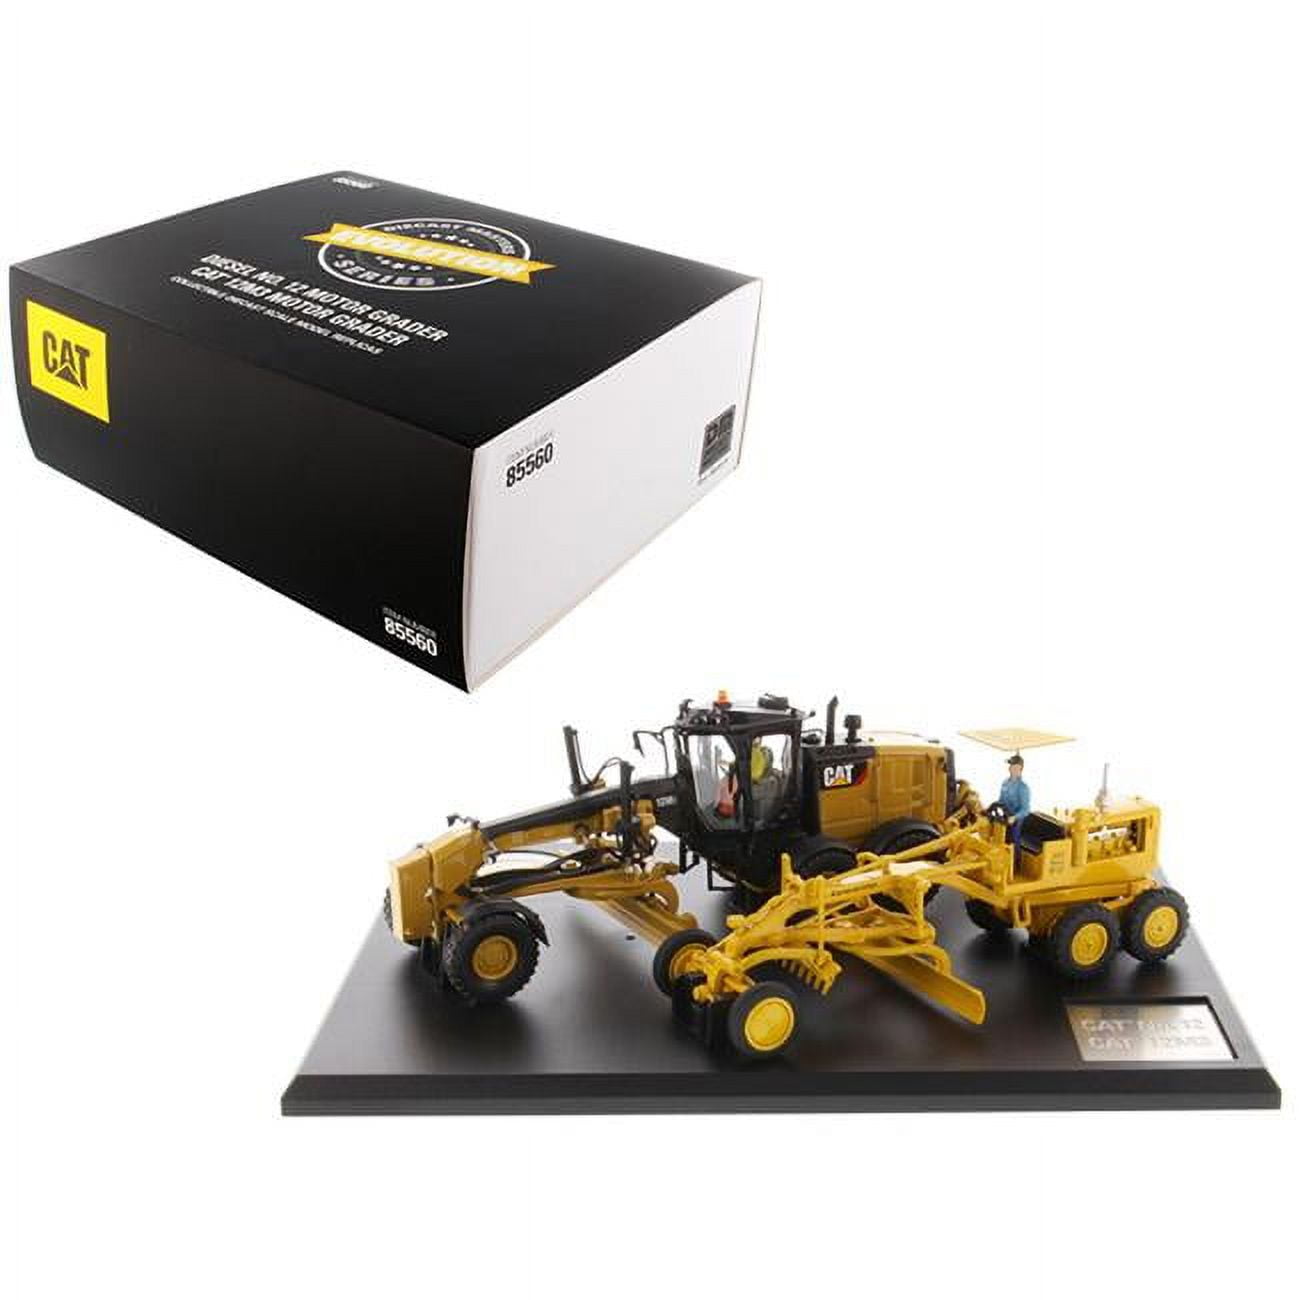 DieCast Masters 85560 1 by 50 Scale Diecast Motor Grader Circa & Current Operators Evolution Series for 1939-1959 CAT Caterpillar No 12 & 12M3 M